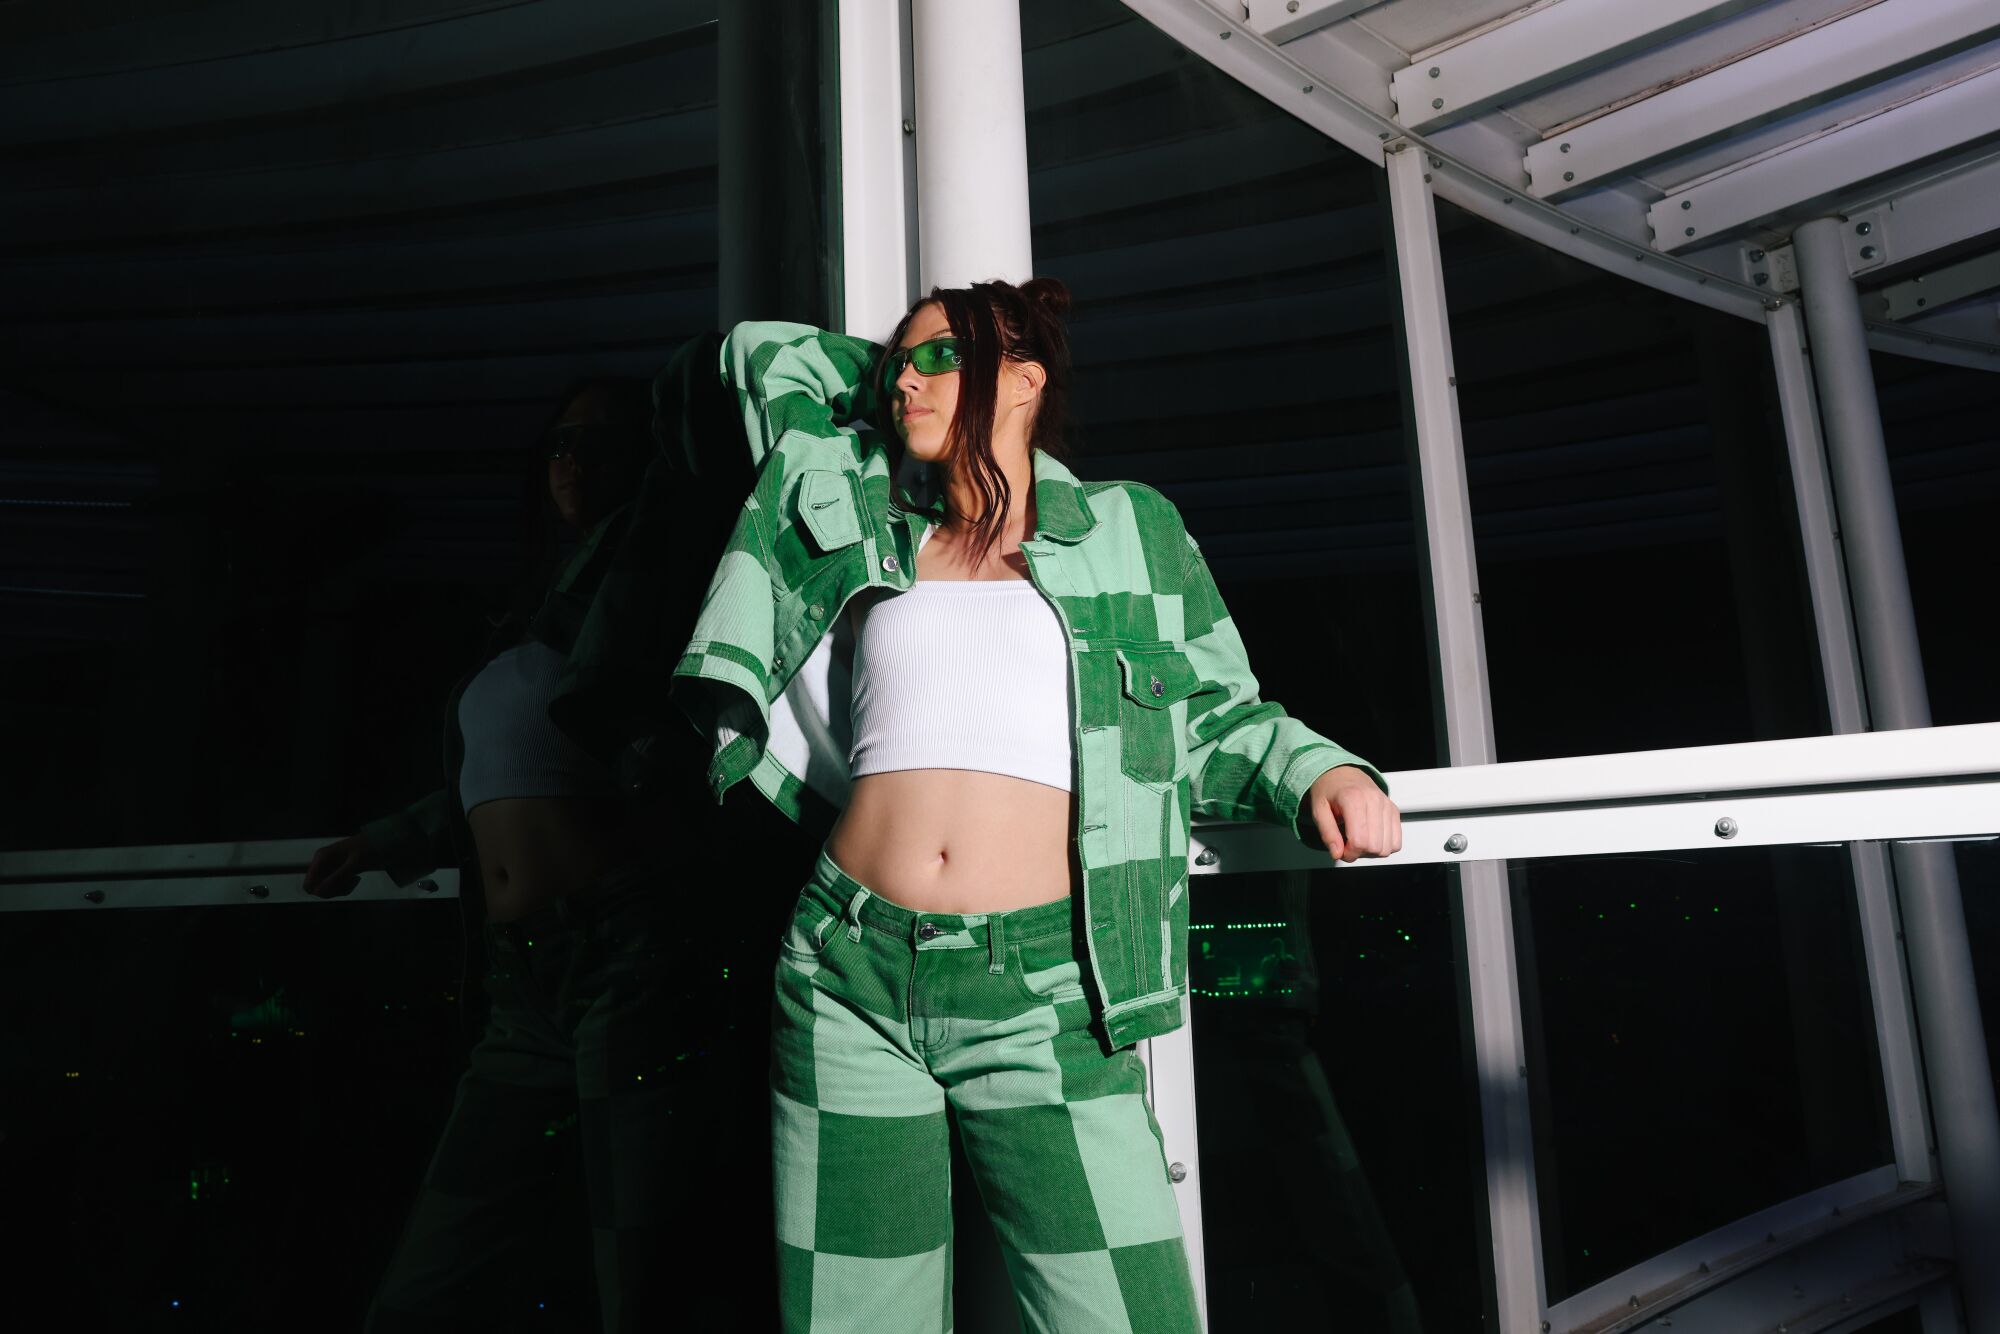 A woman in a green patterned jacket and pants poses with one elbow up near her face